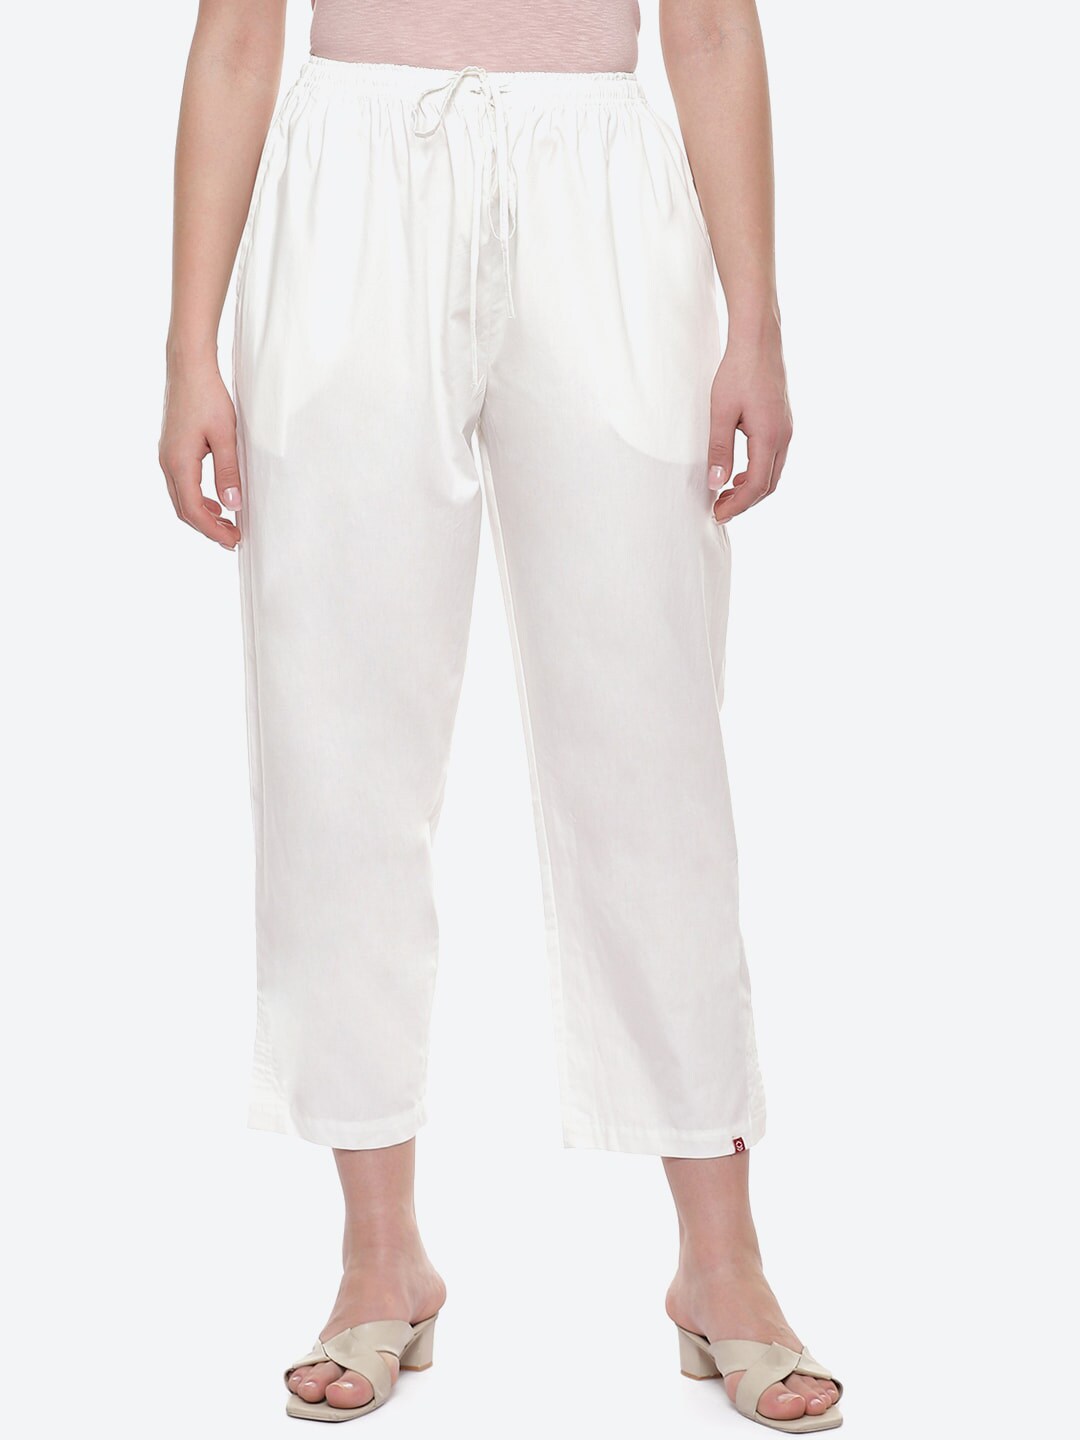 Biba Women Off White Straight Fit Trousers Price in India